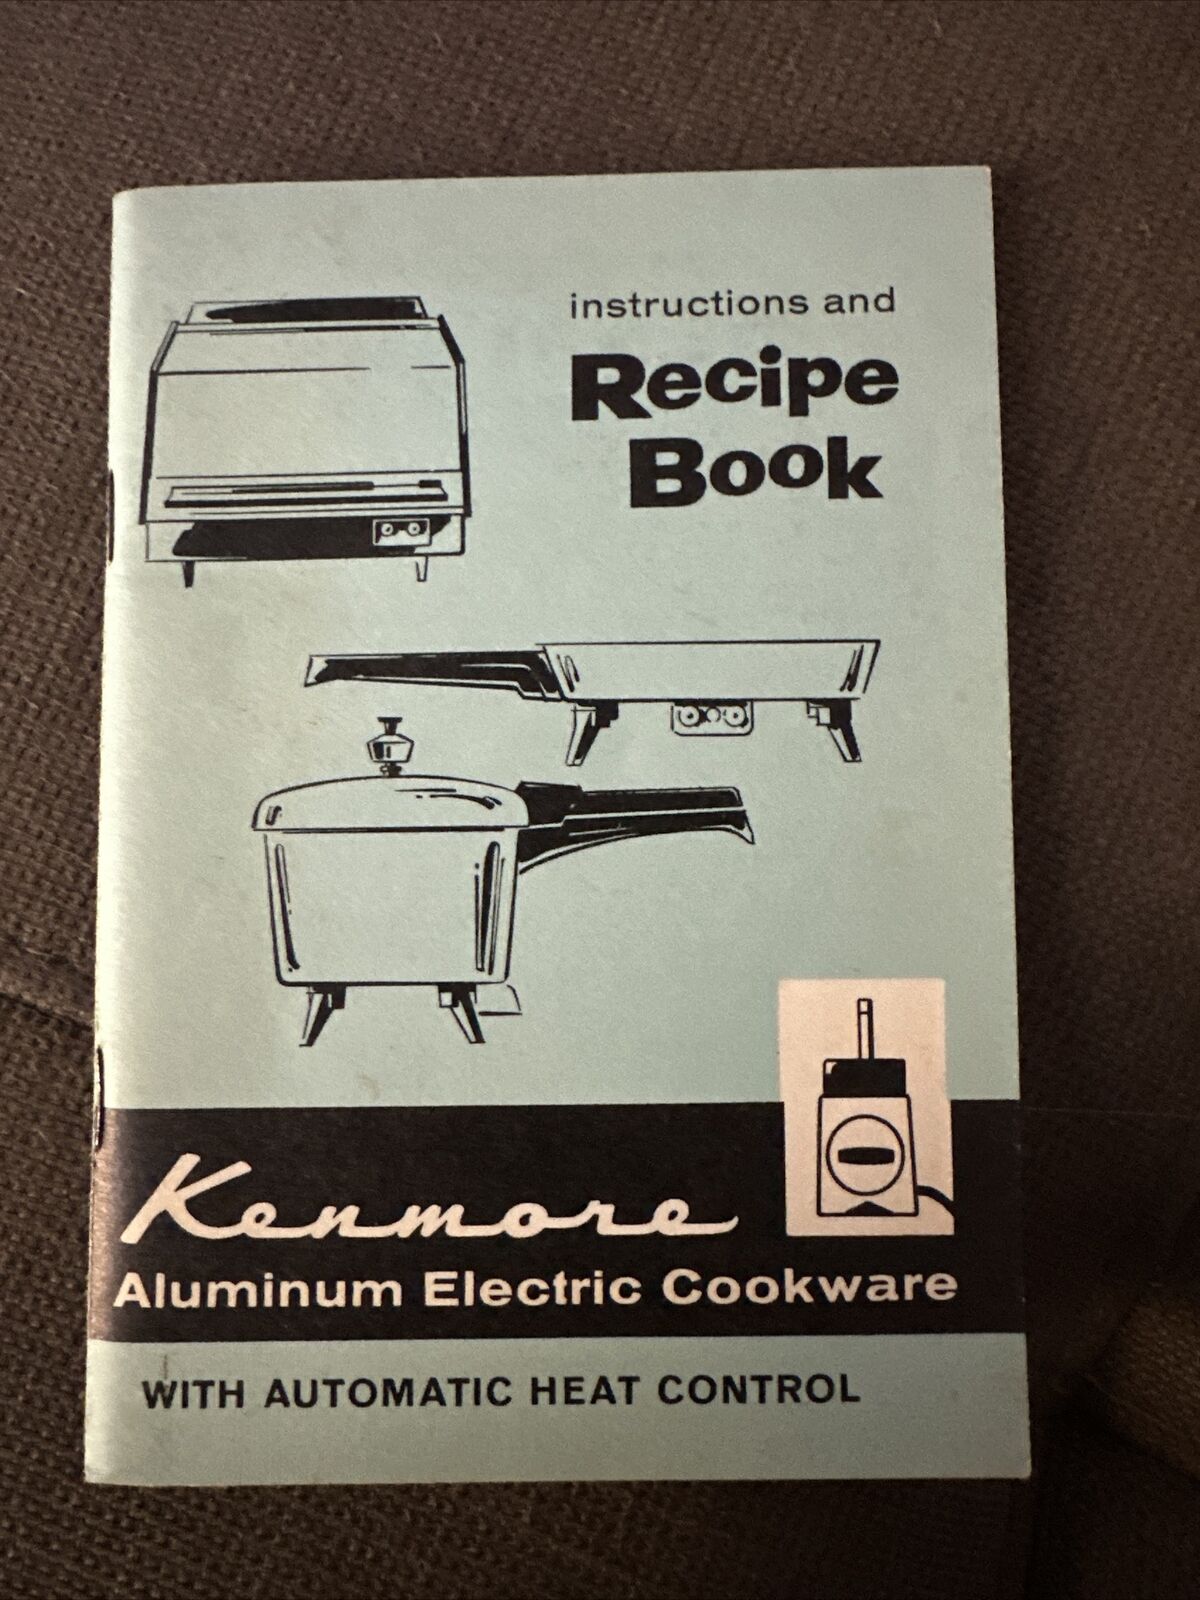 1961 Kenmore Aluminum Electric Cookware Instructions and Recipe Book